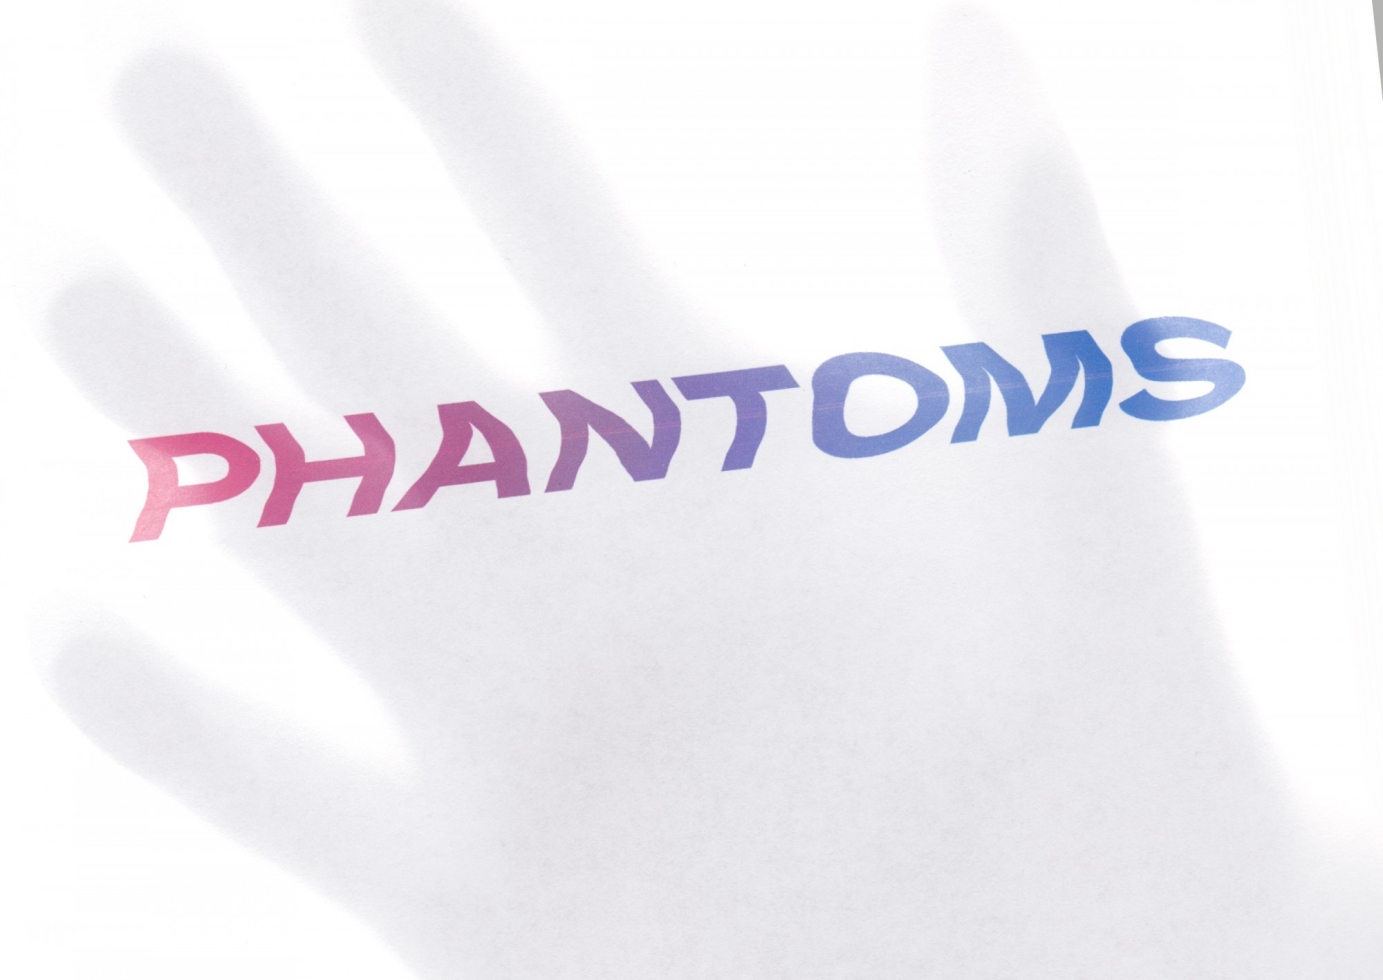 Creative direction for Phantoms by Tristan Palmer